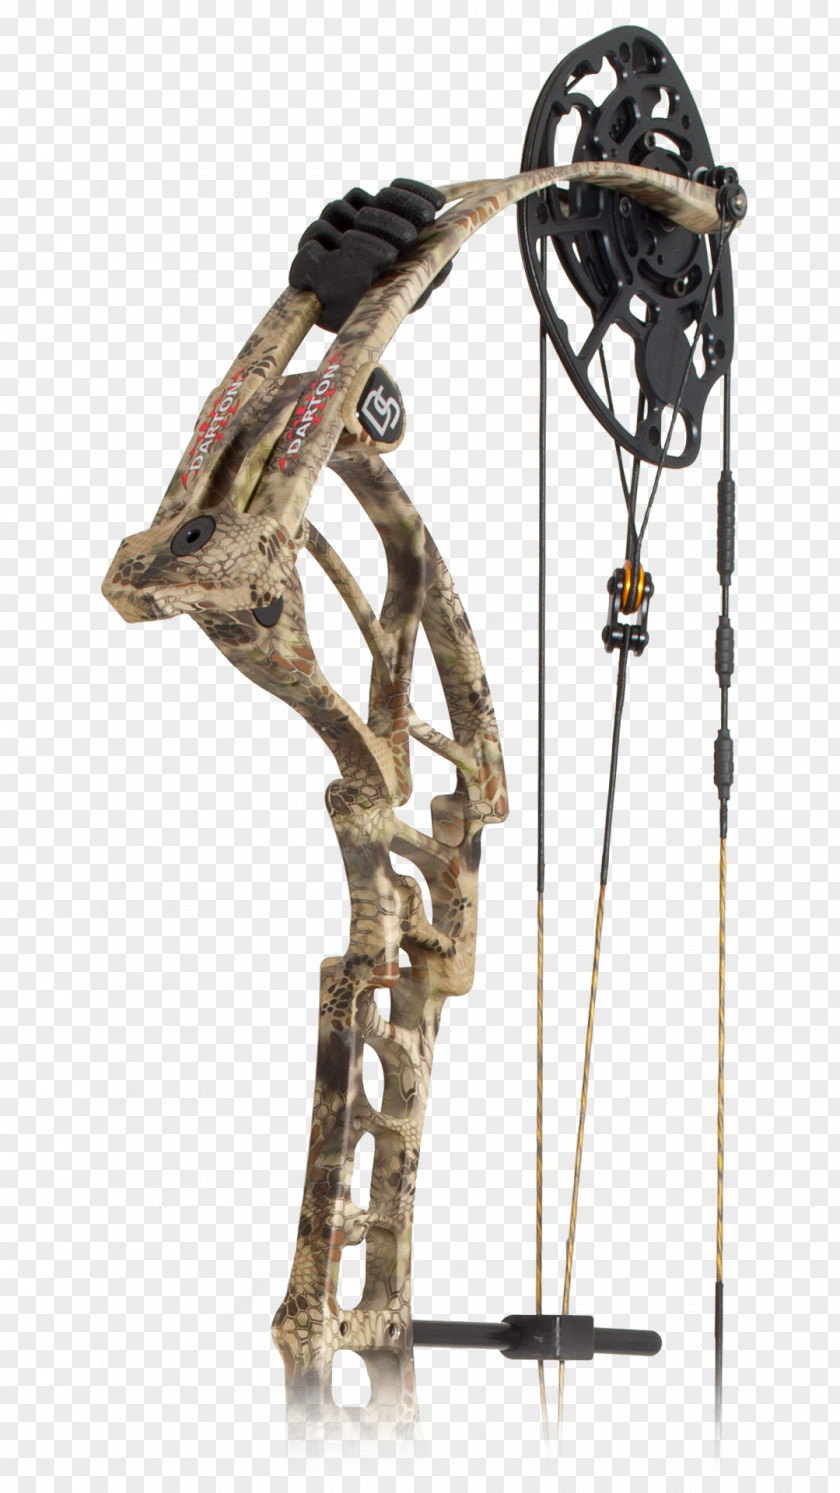 Bow Compound Bows Darton Archery Manufacturing Road And Arrow PNG